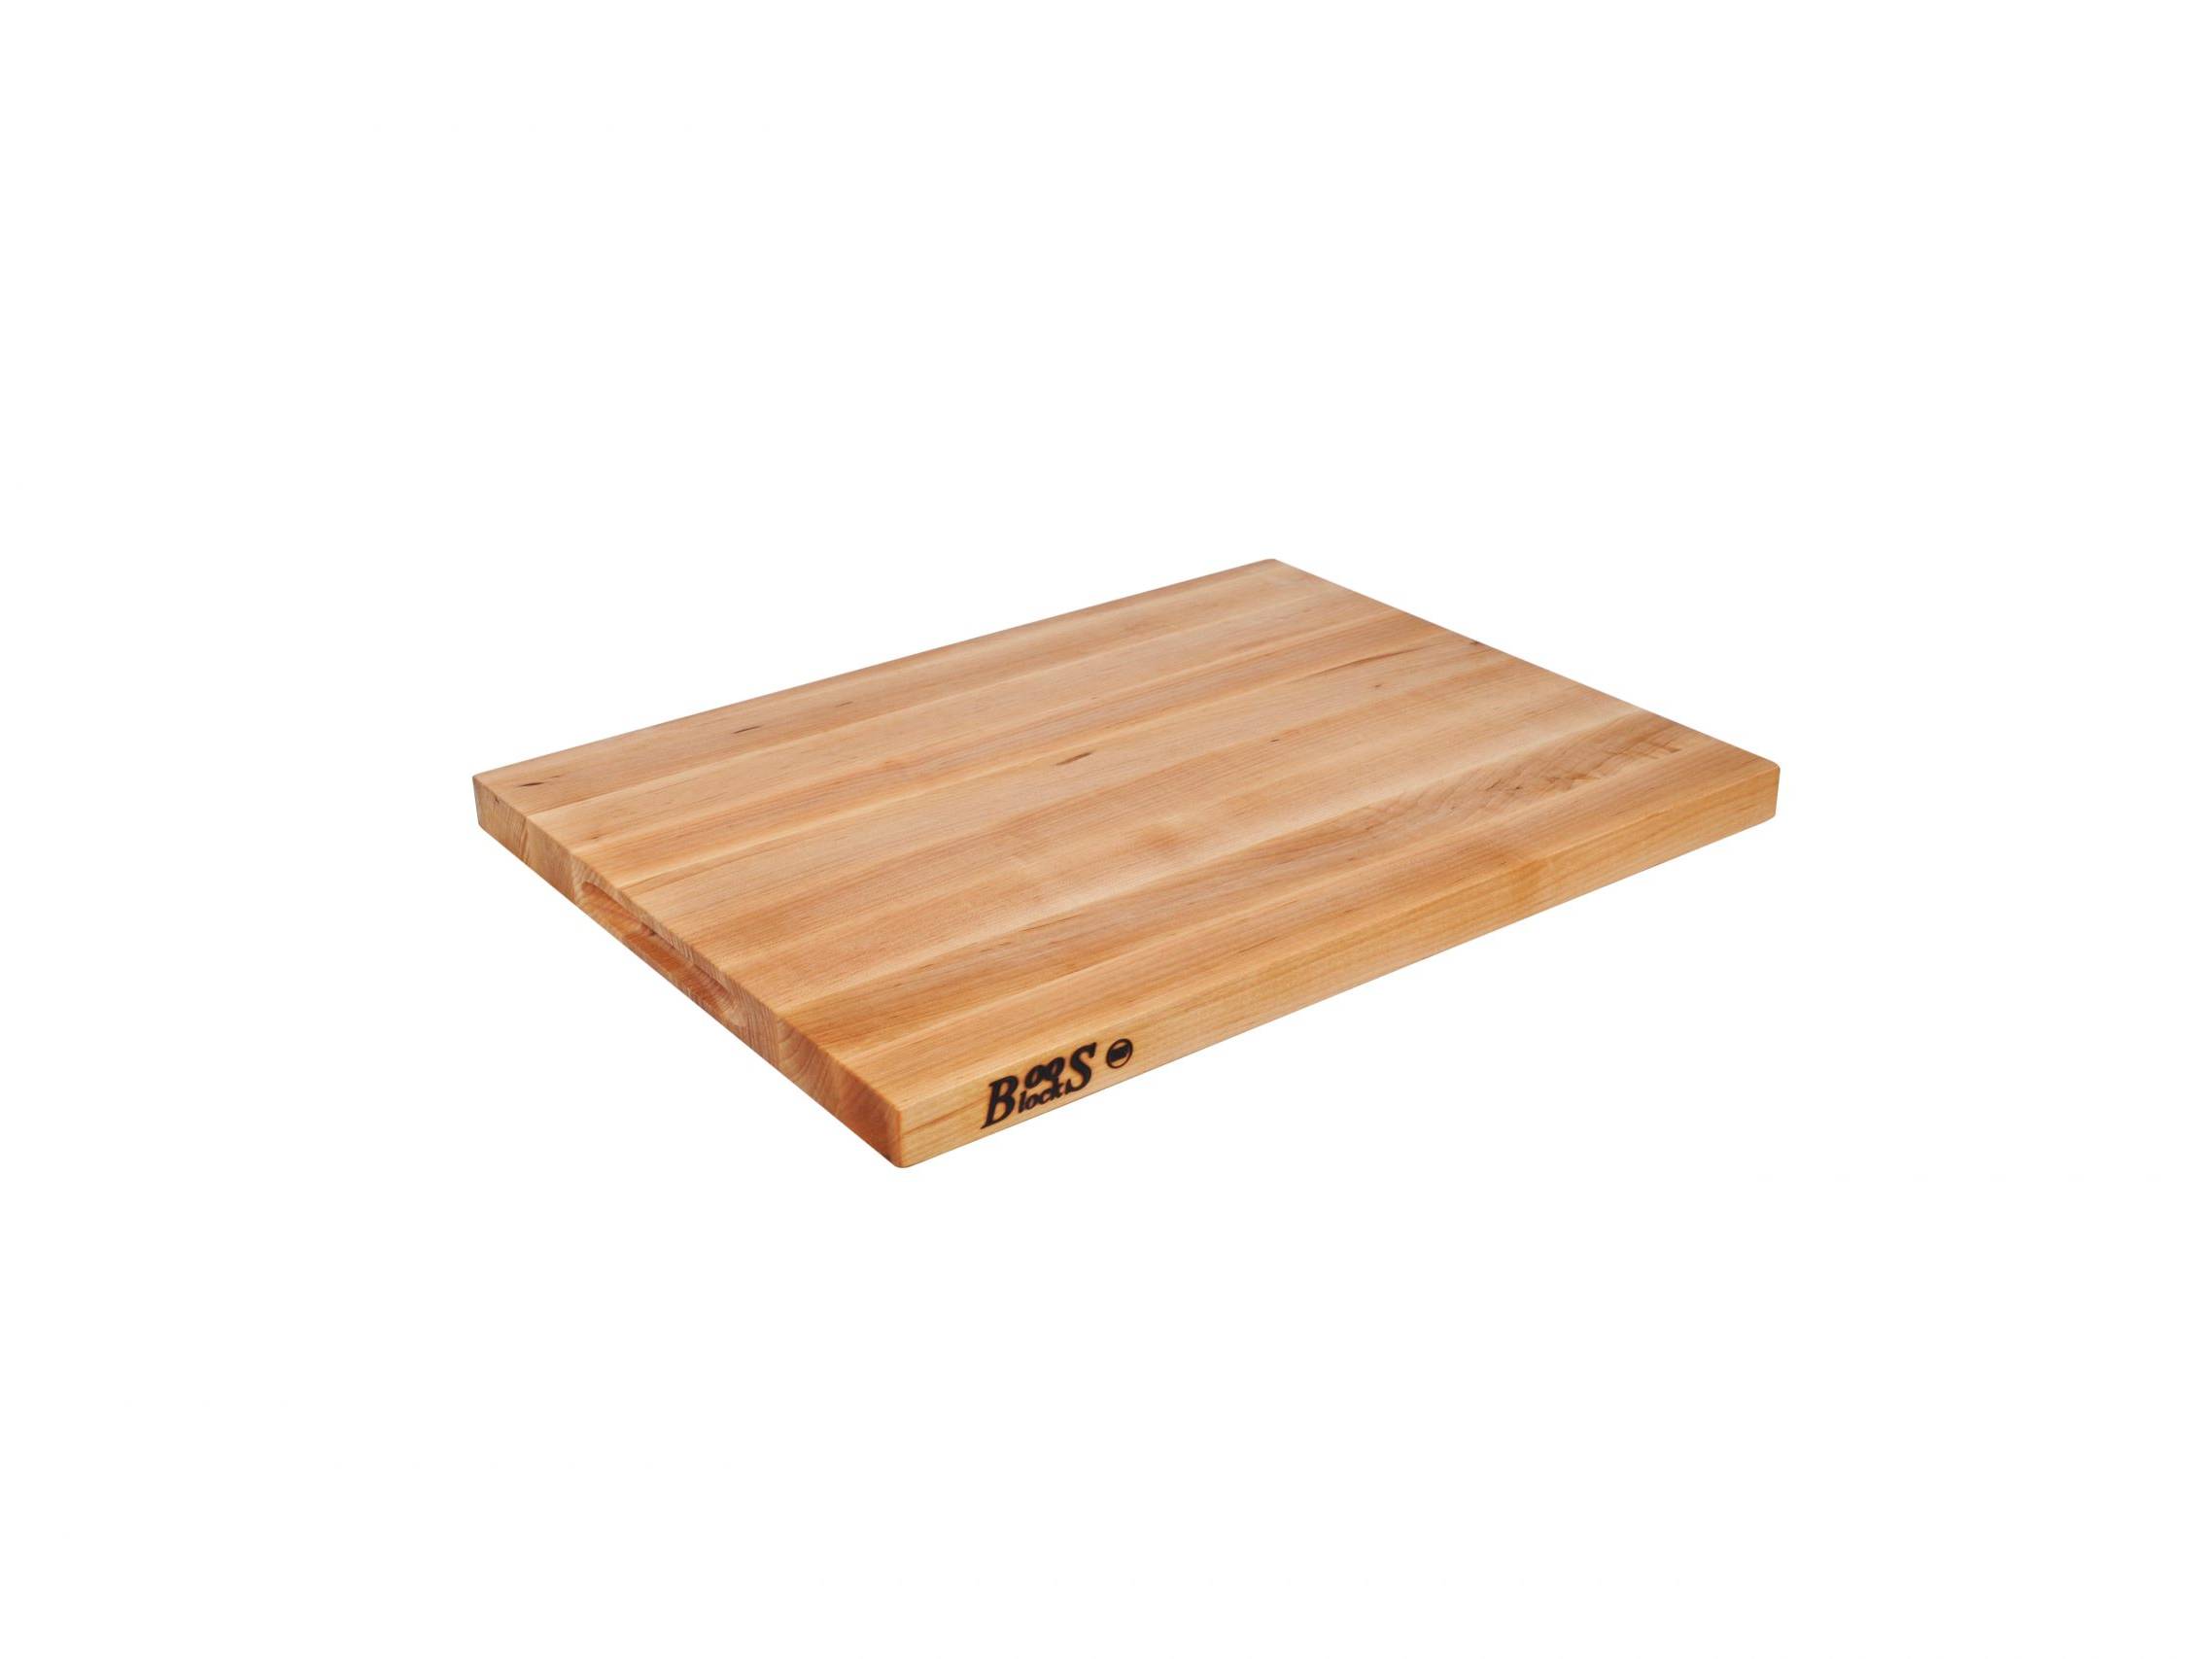 Pro Chef Lite Hard Maple Cutting Board with recessed handles; can be used on both sides 5